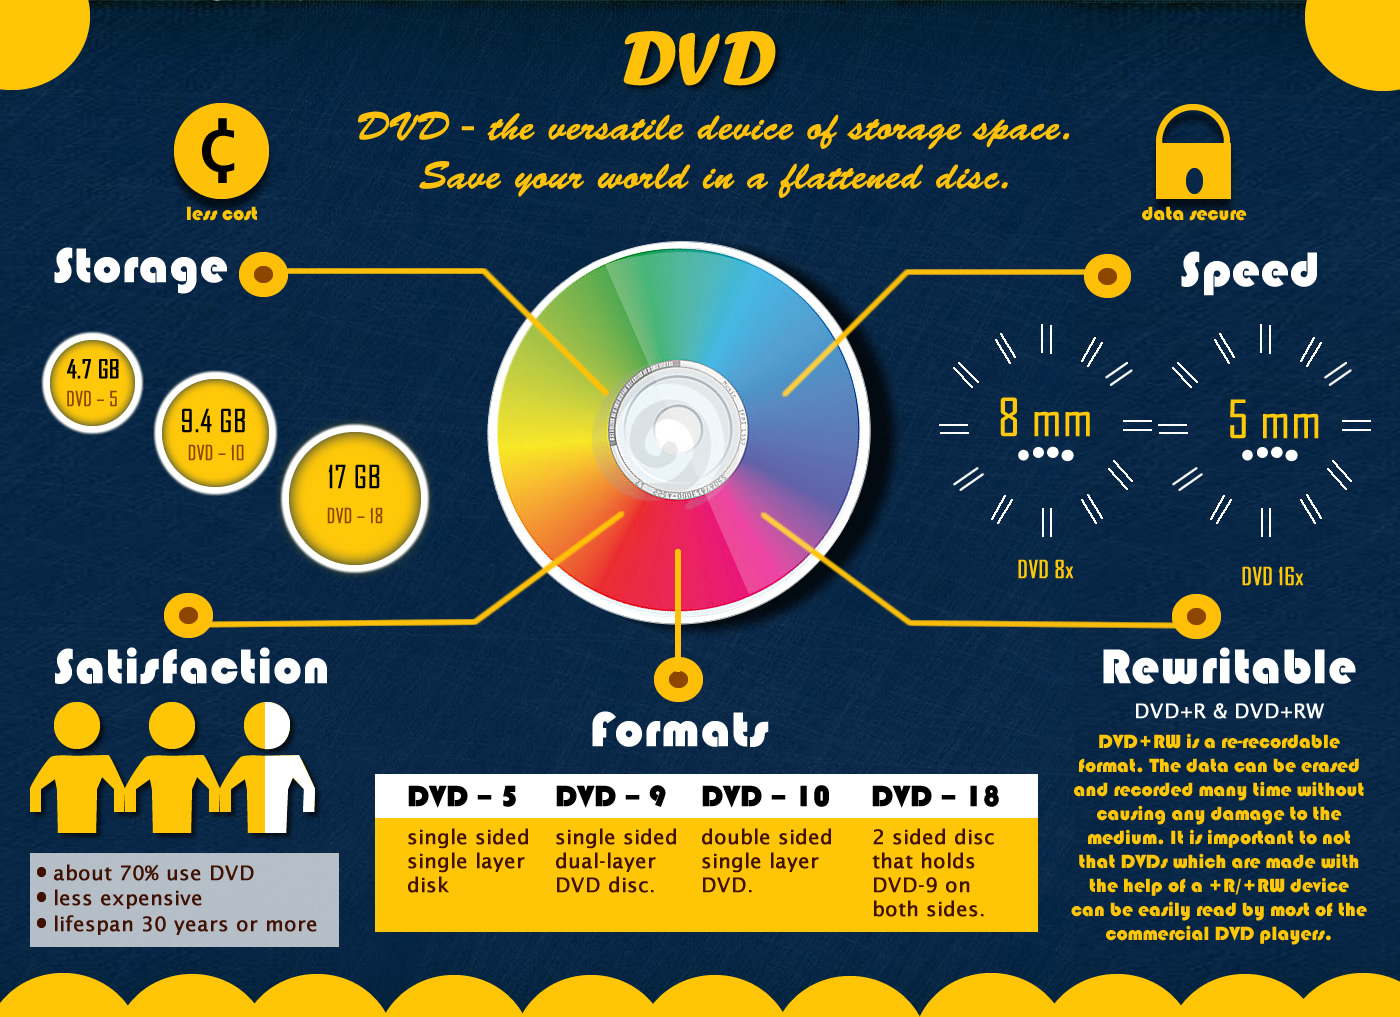 What Are Differences Between Dvd5 Dvd9 Dvd10 And Dvd18